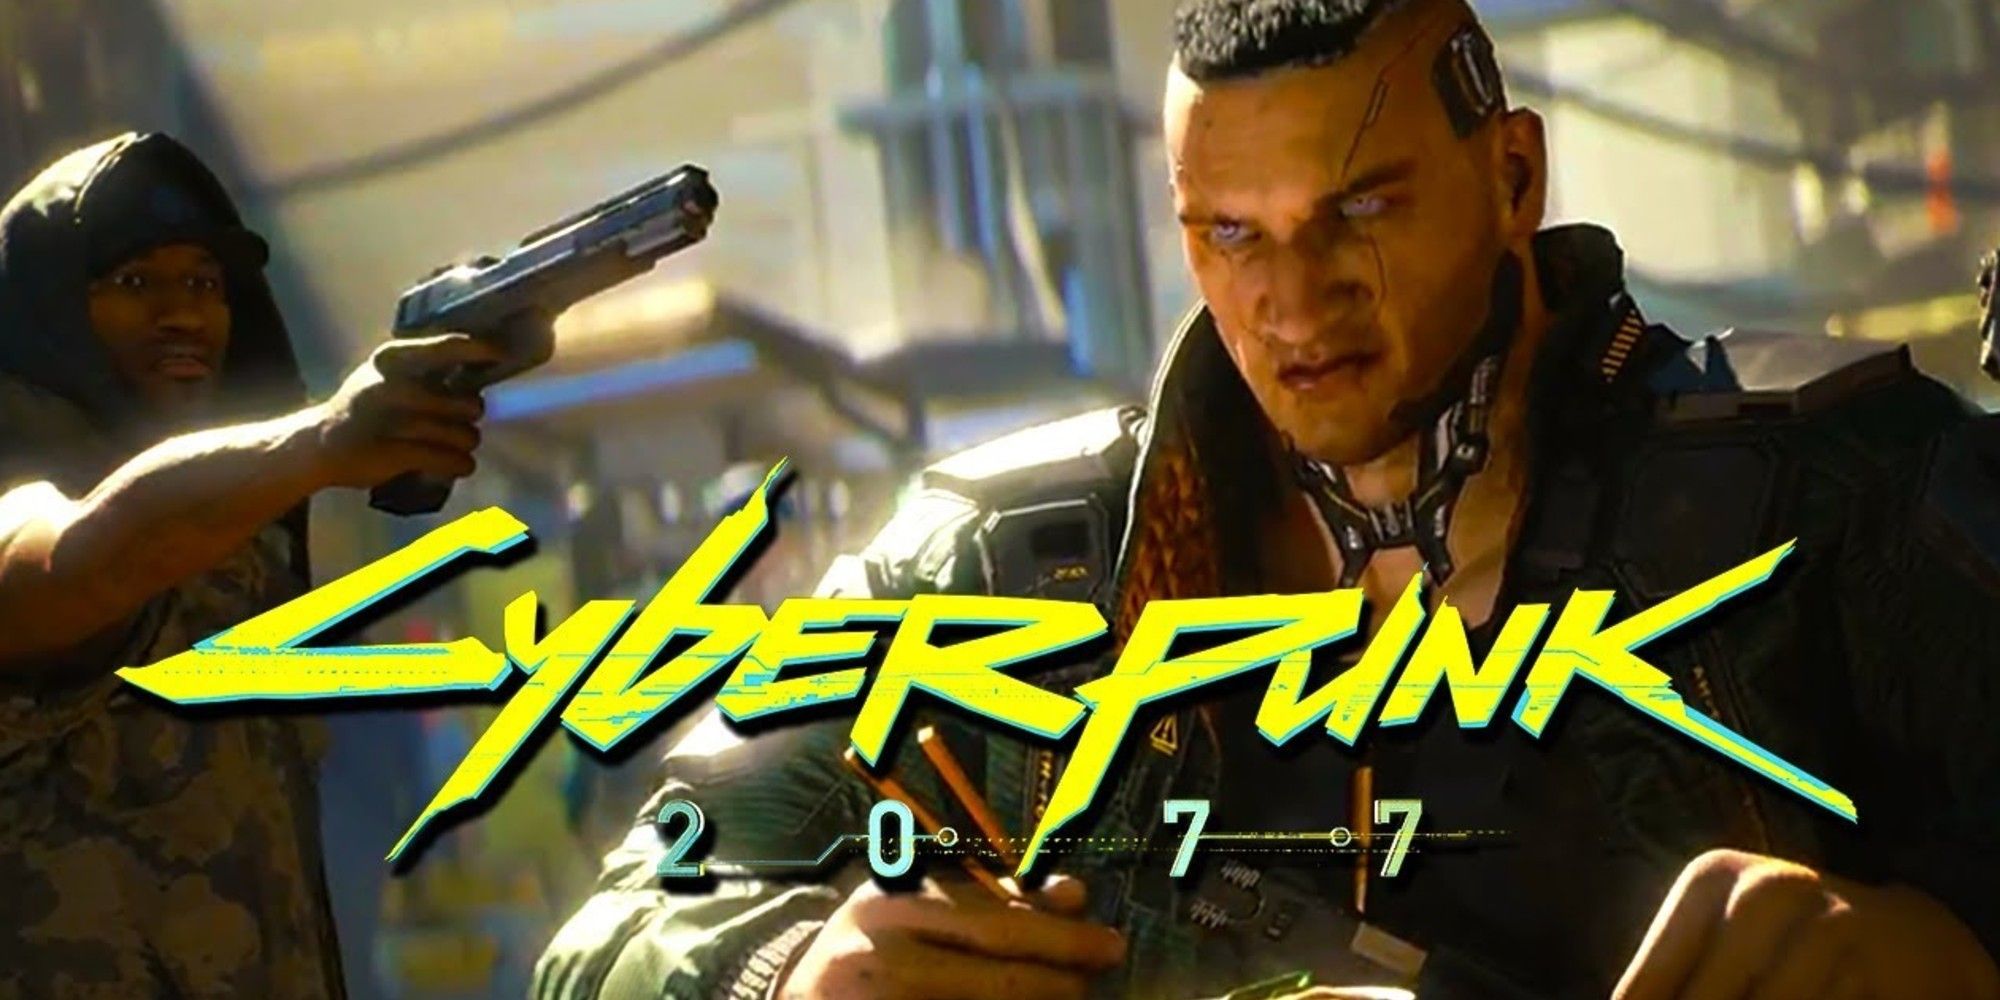 Why Cyberpunk 2077 Isn’t Confirmed To Release On PS5 Yet